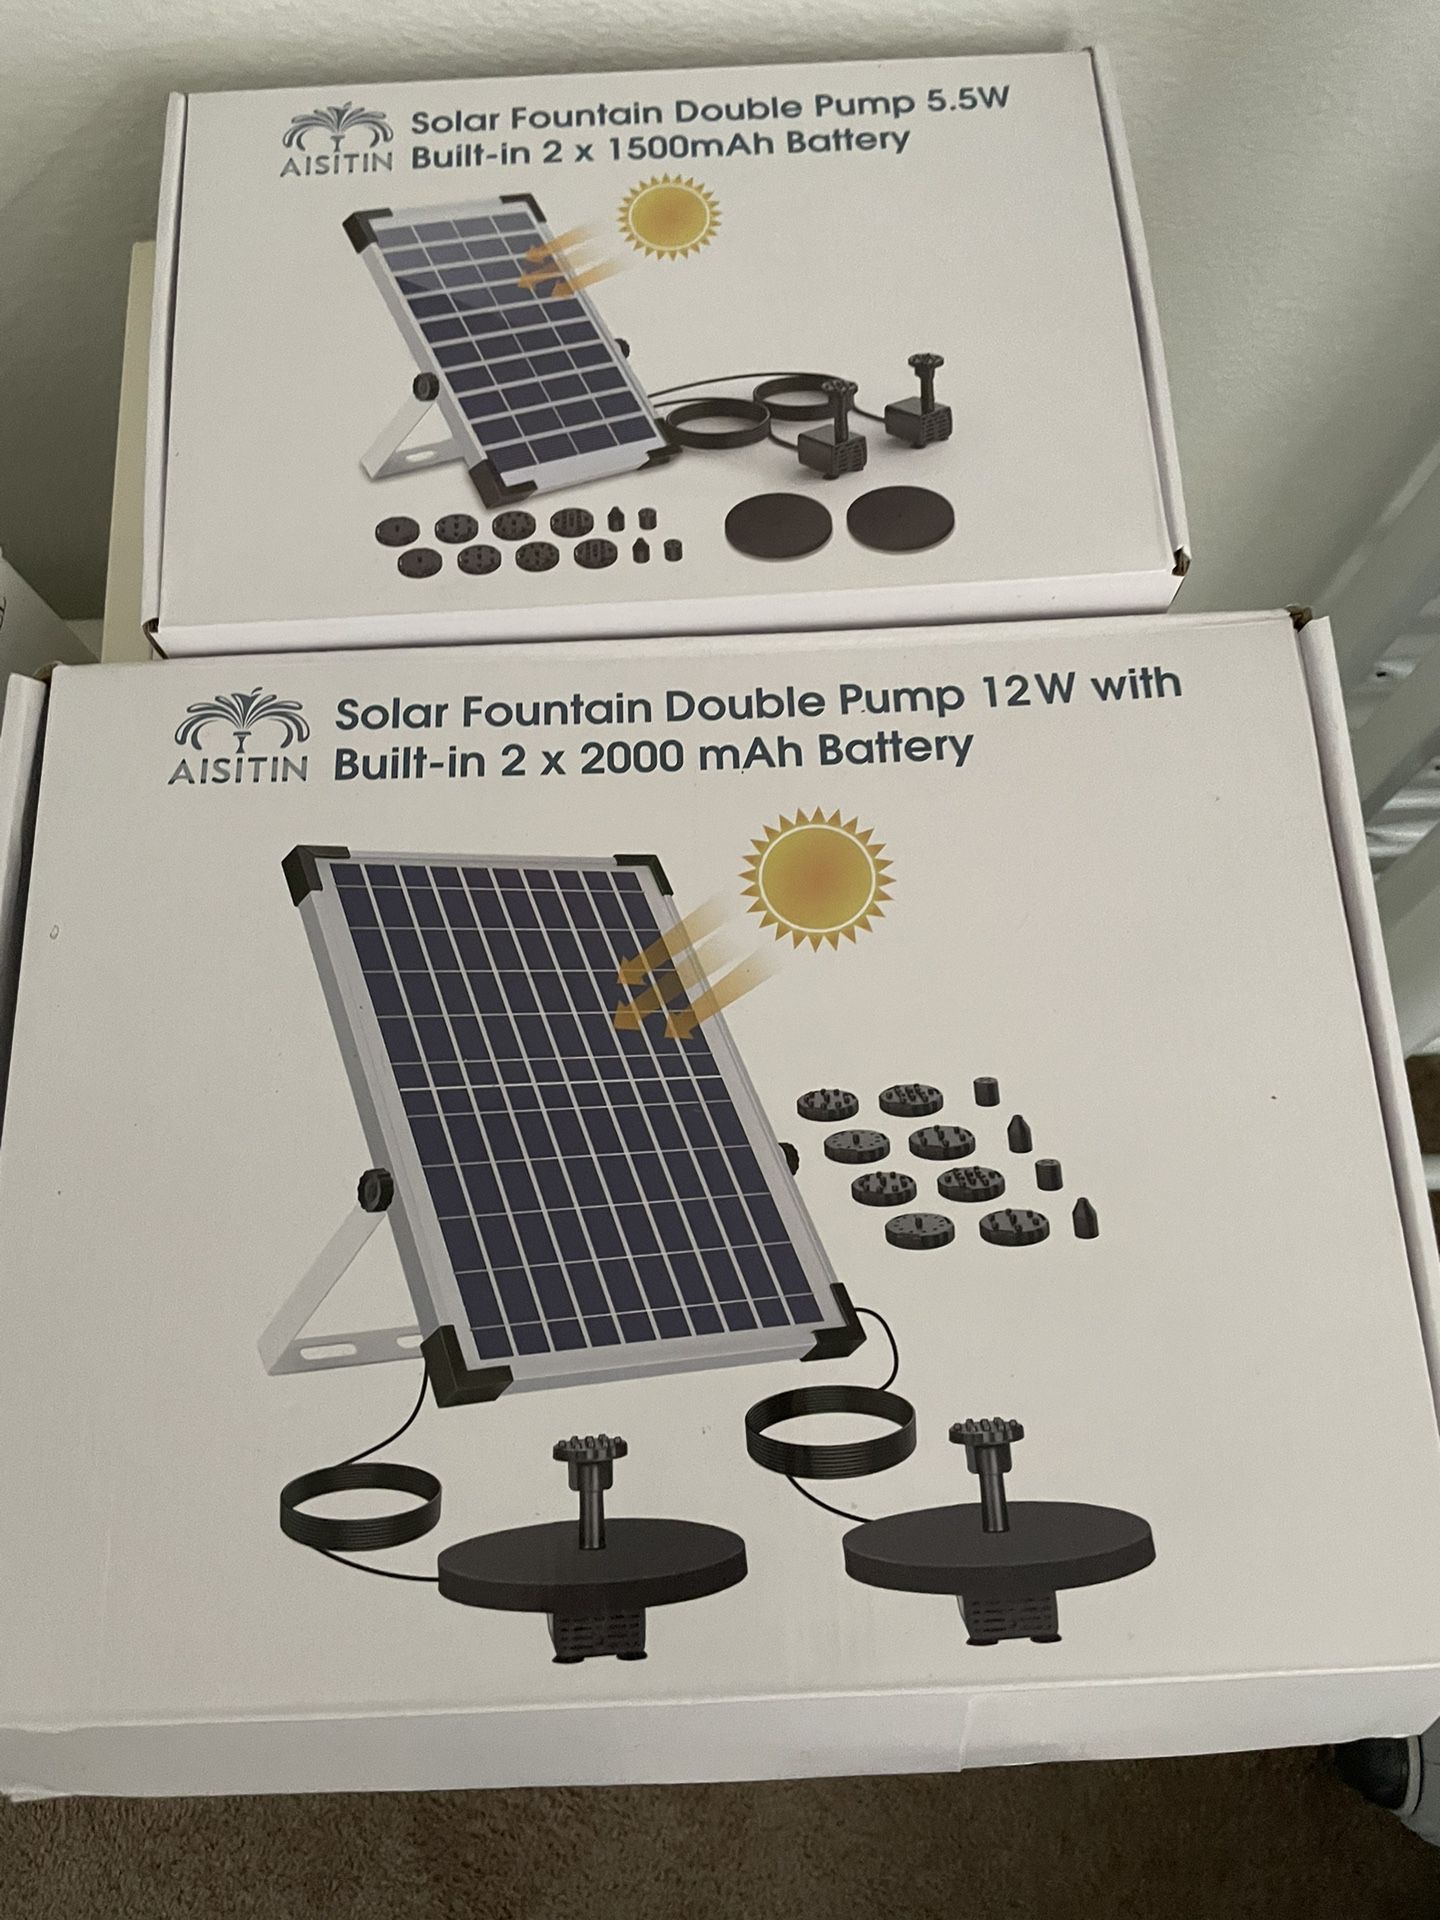 Two solar power fountains